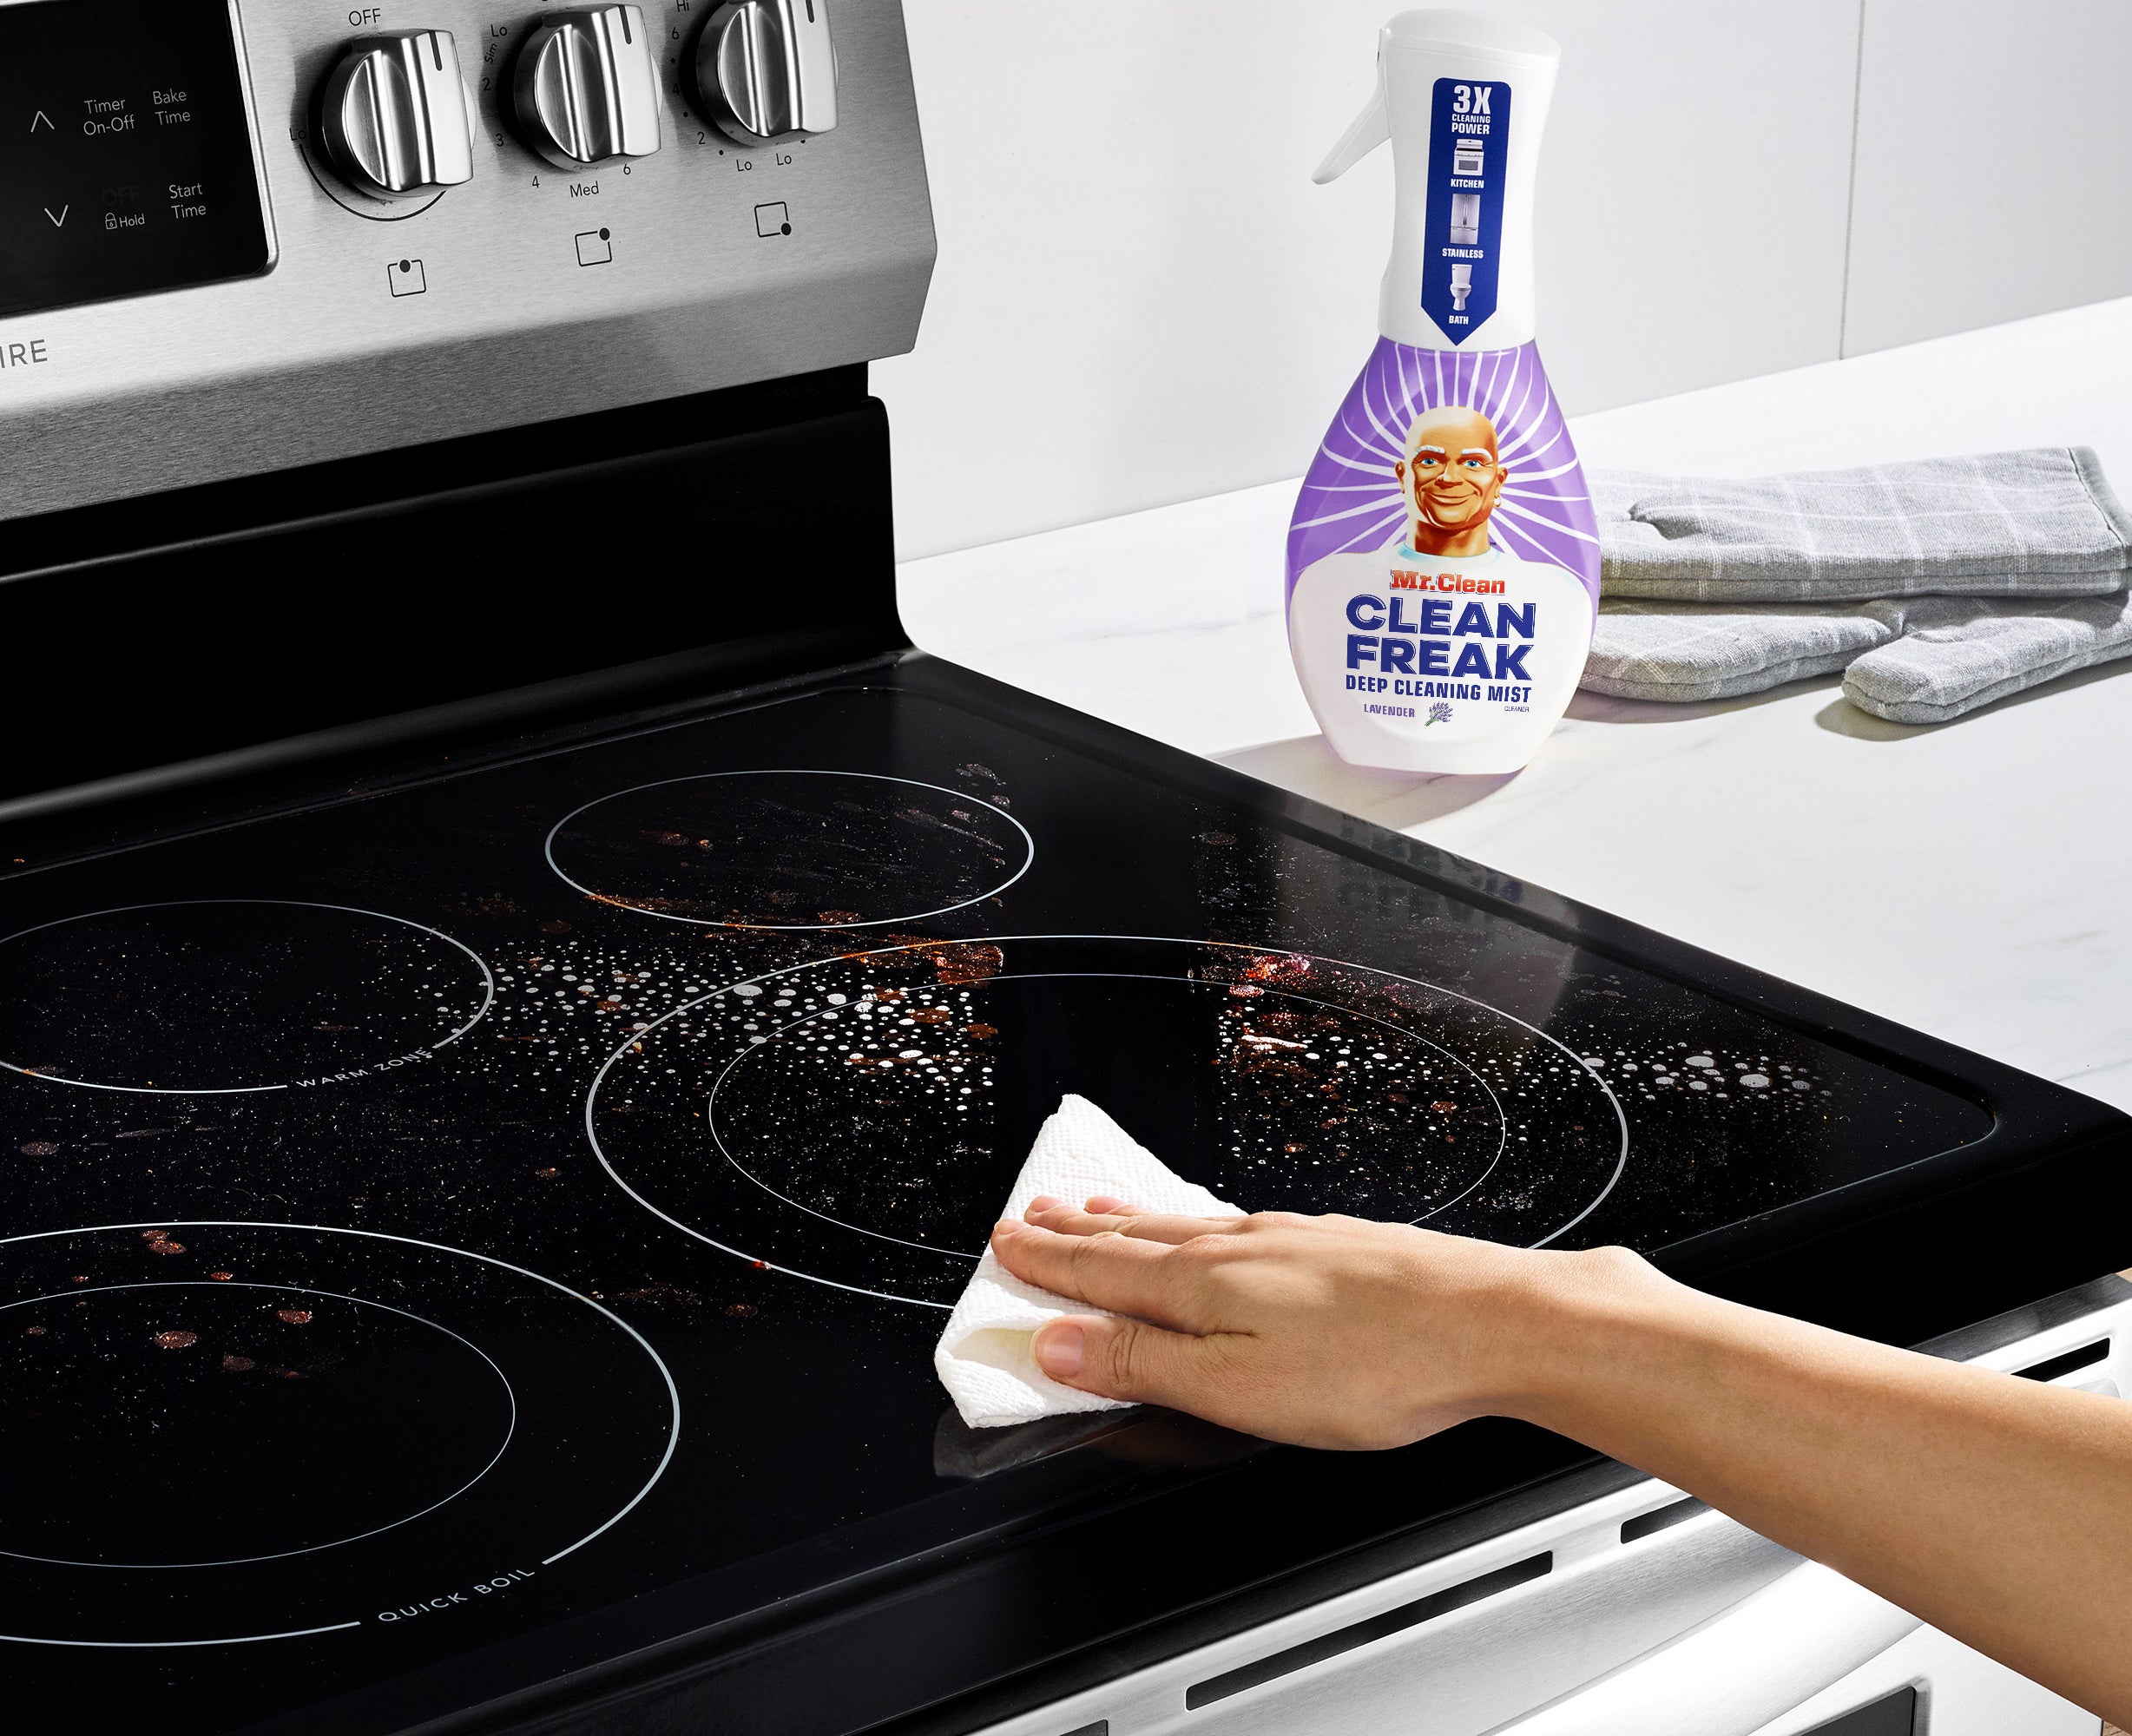 The cleaner being used on a glass cooktop